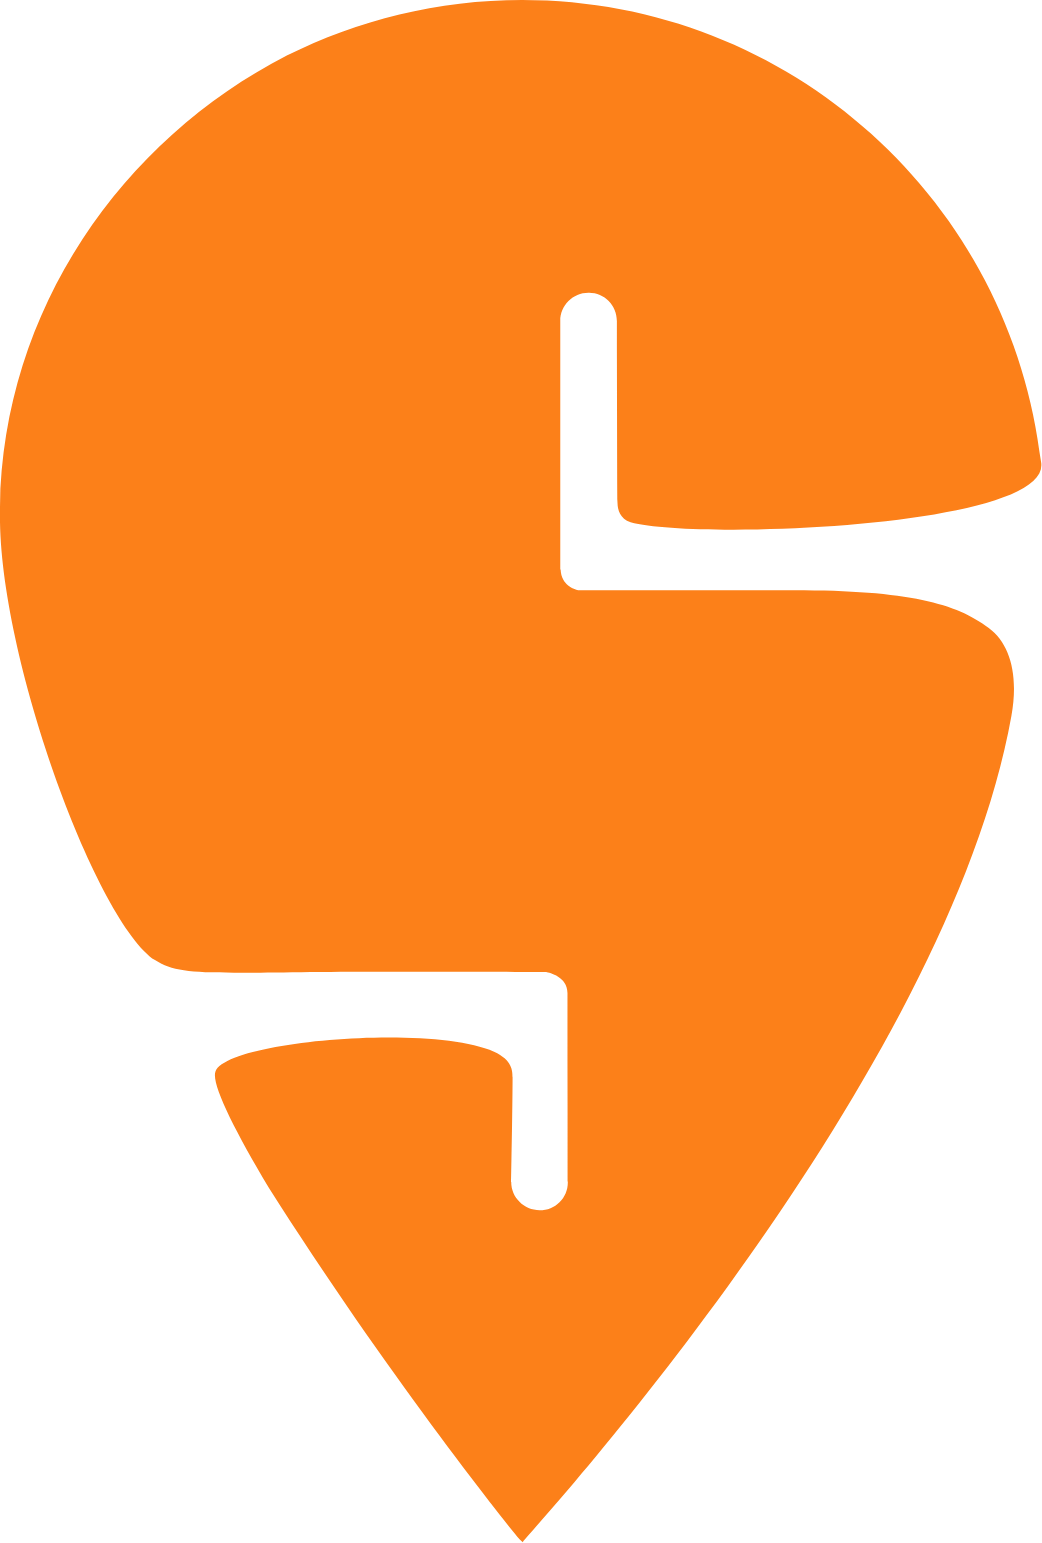 Download Swiggy Logo PNG and Vector (PDF, SVG, Ai, EPS) Free